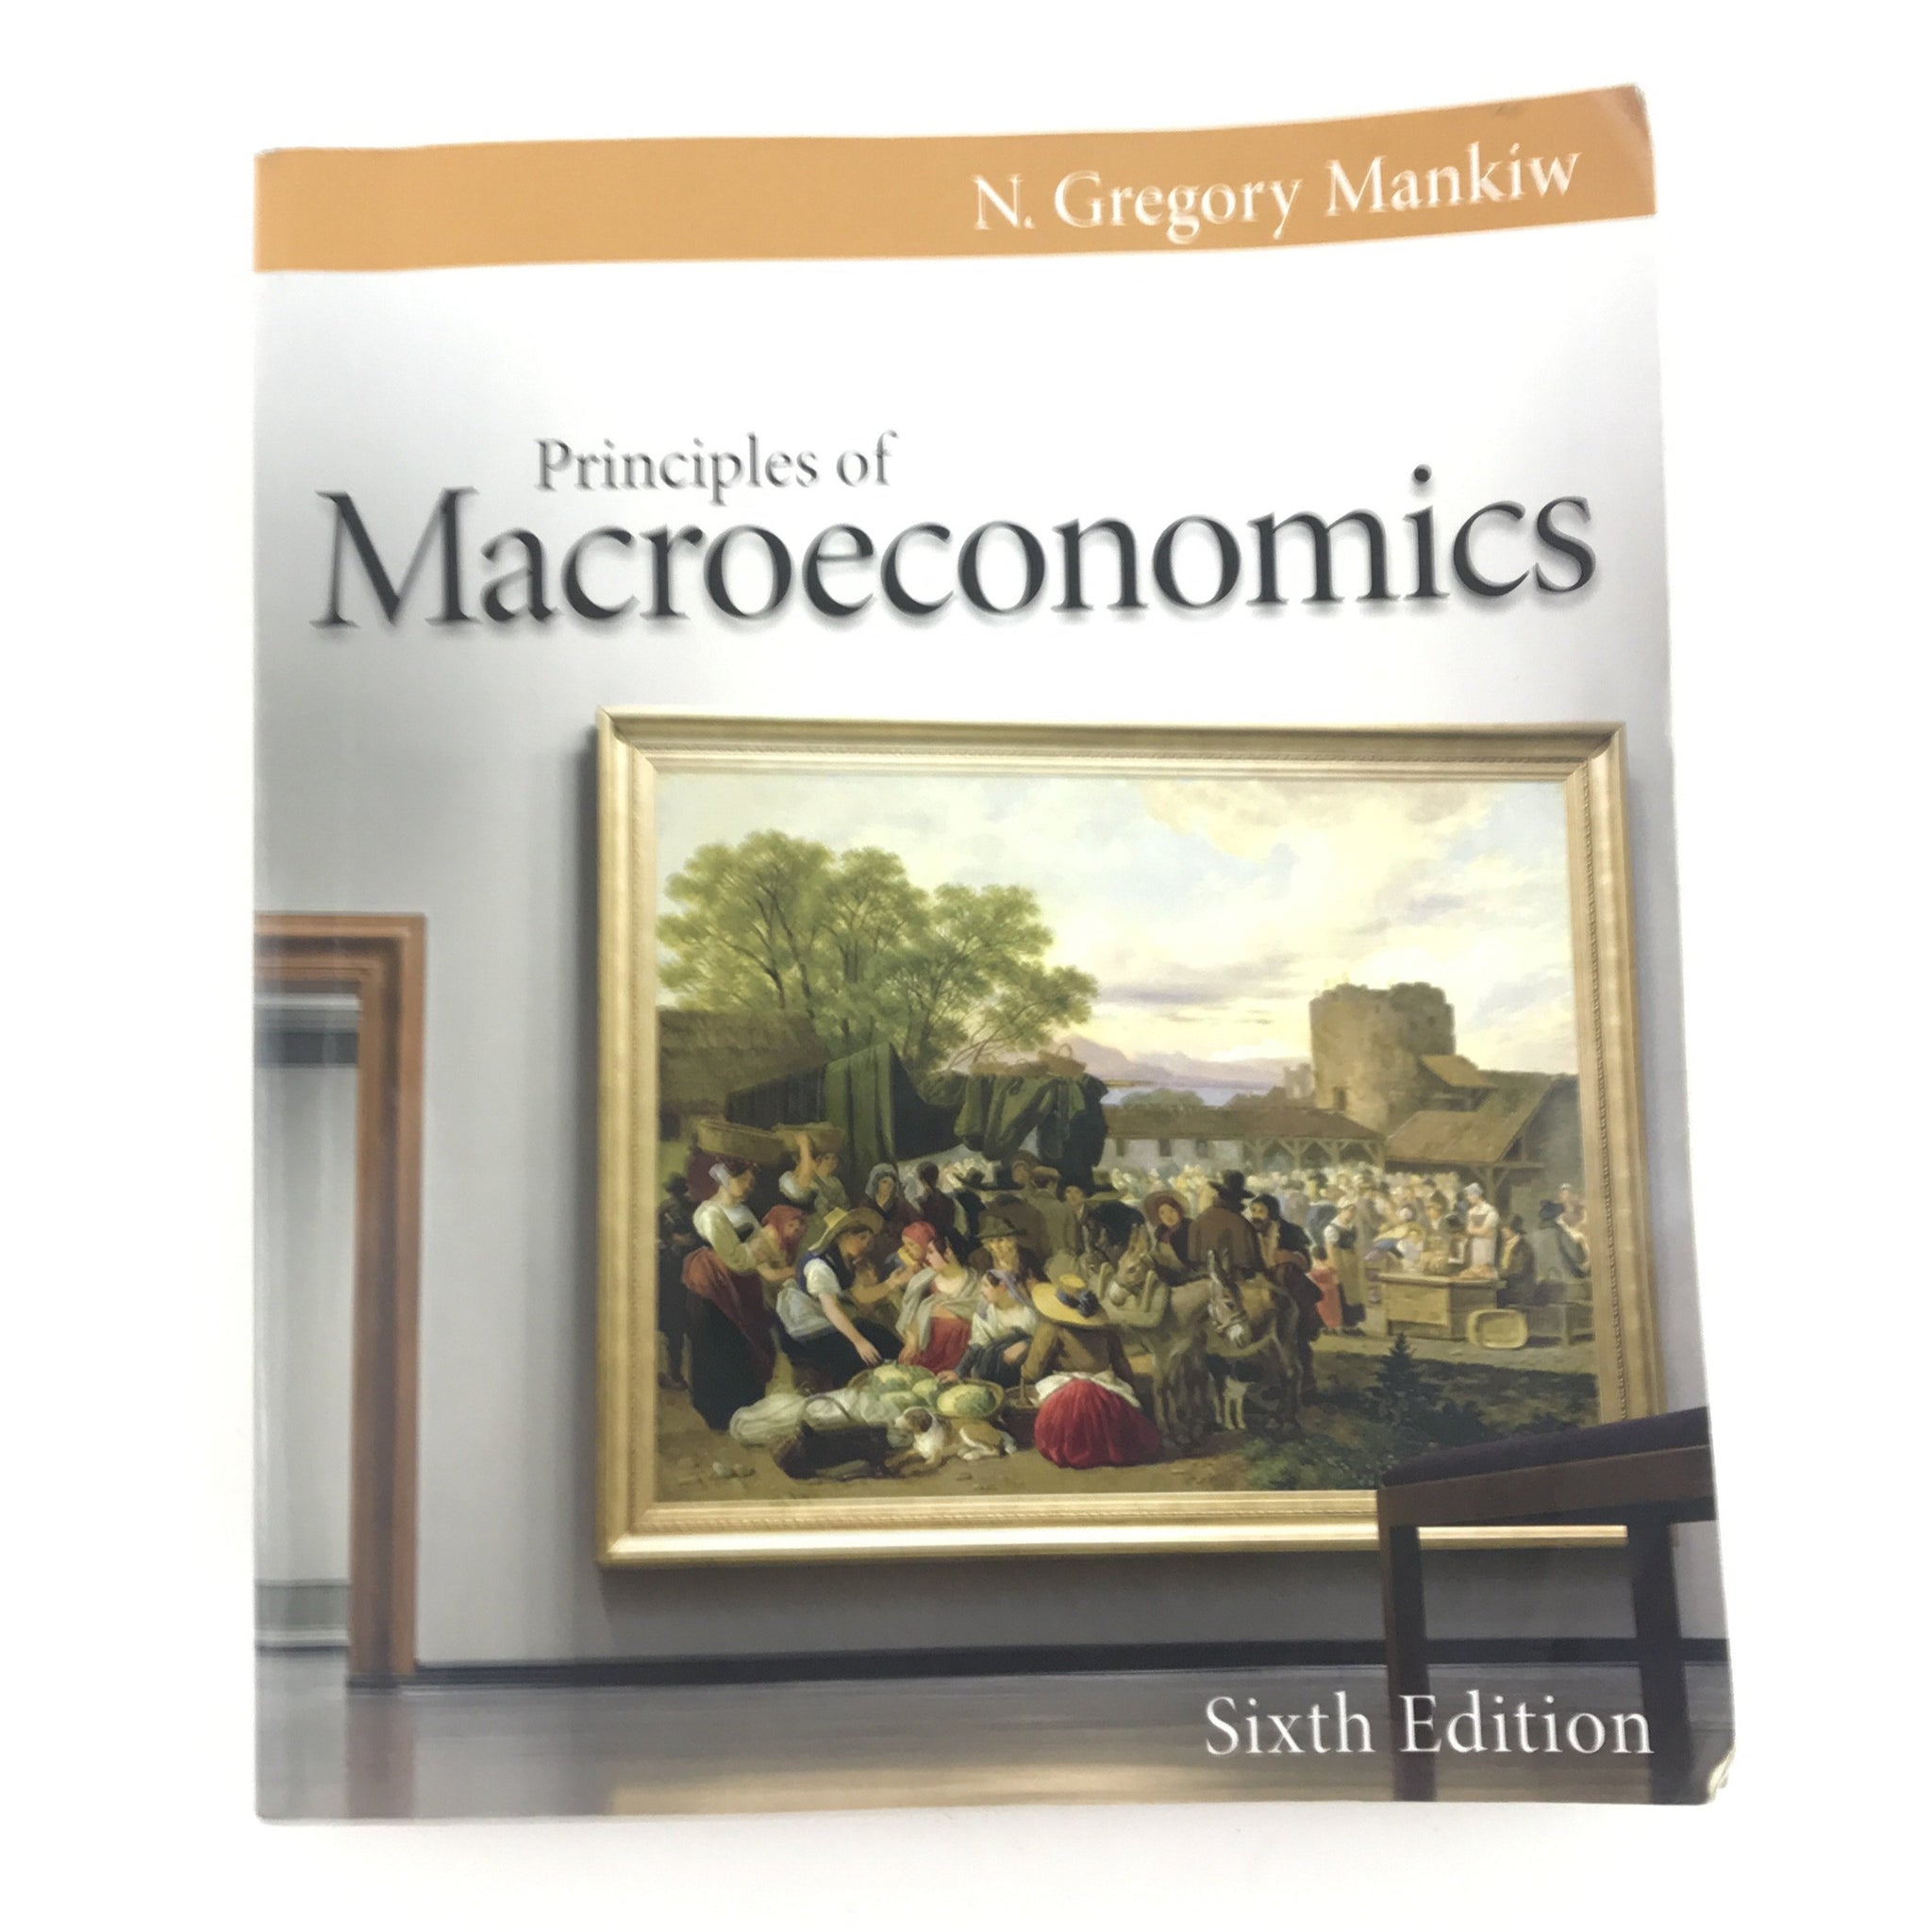 Principles of Macroeconomics by N. Gregory Mankiw - 5th Edition